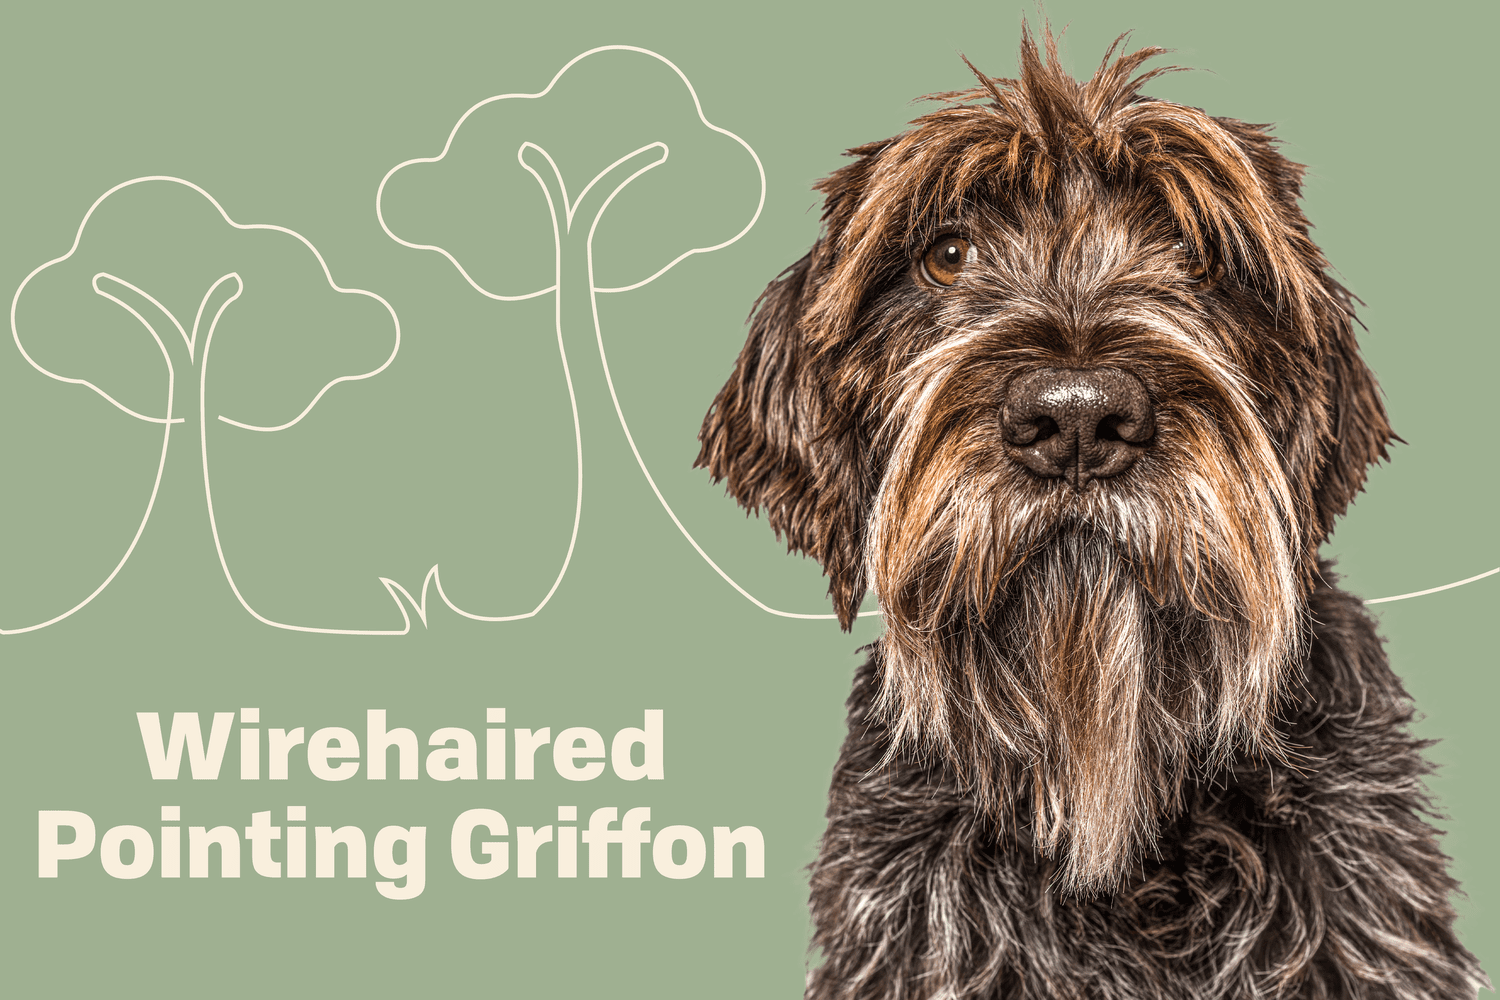 Profile treatment for Wirehaired Pointing Griffon